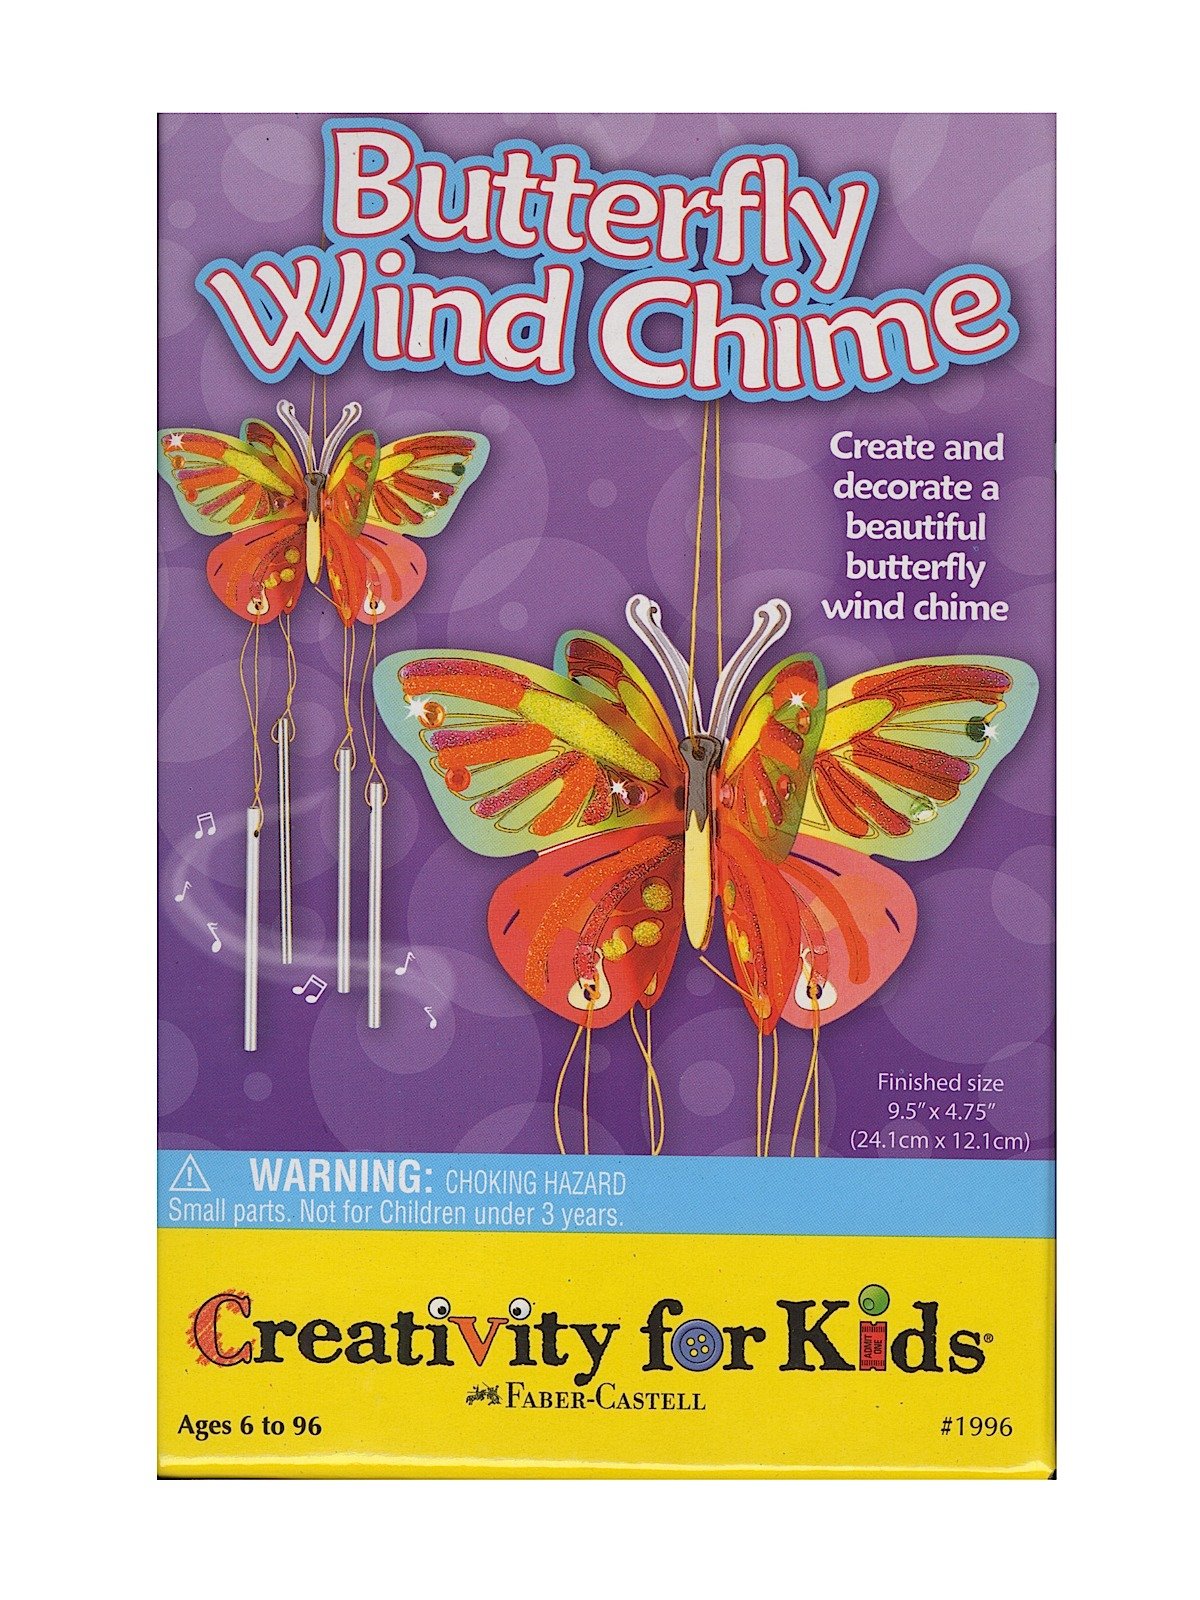 Creativity For Kids - Butterfly Wind Chime Mini Kit